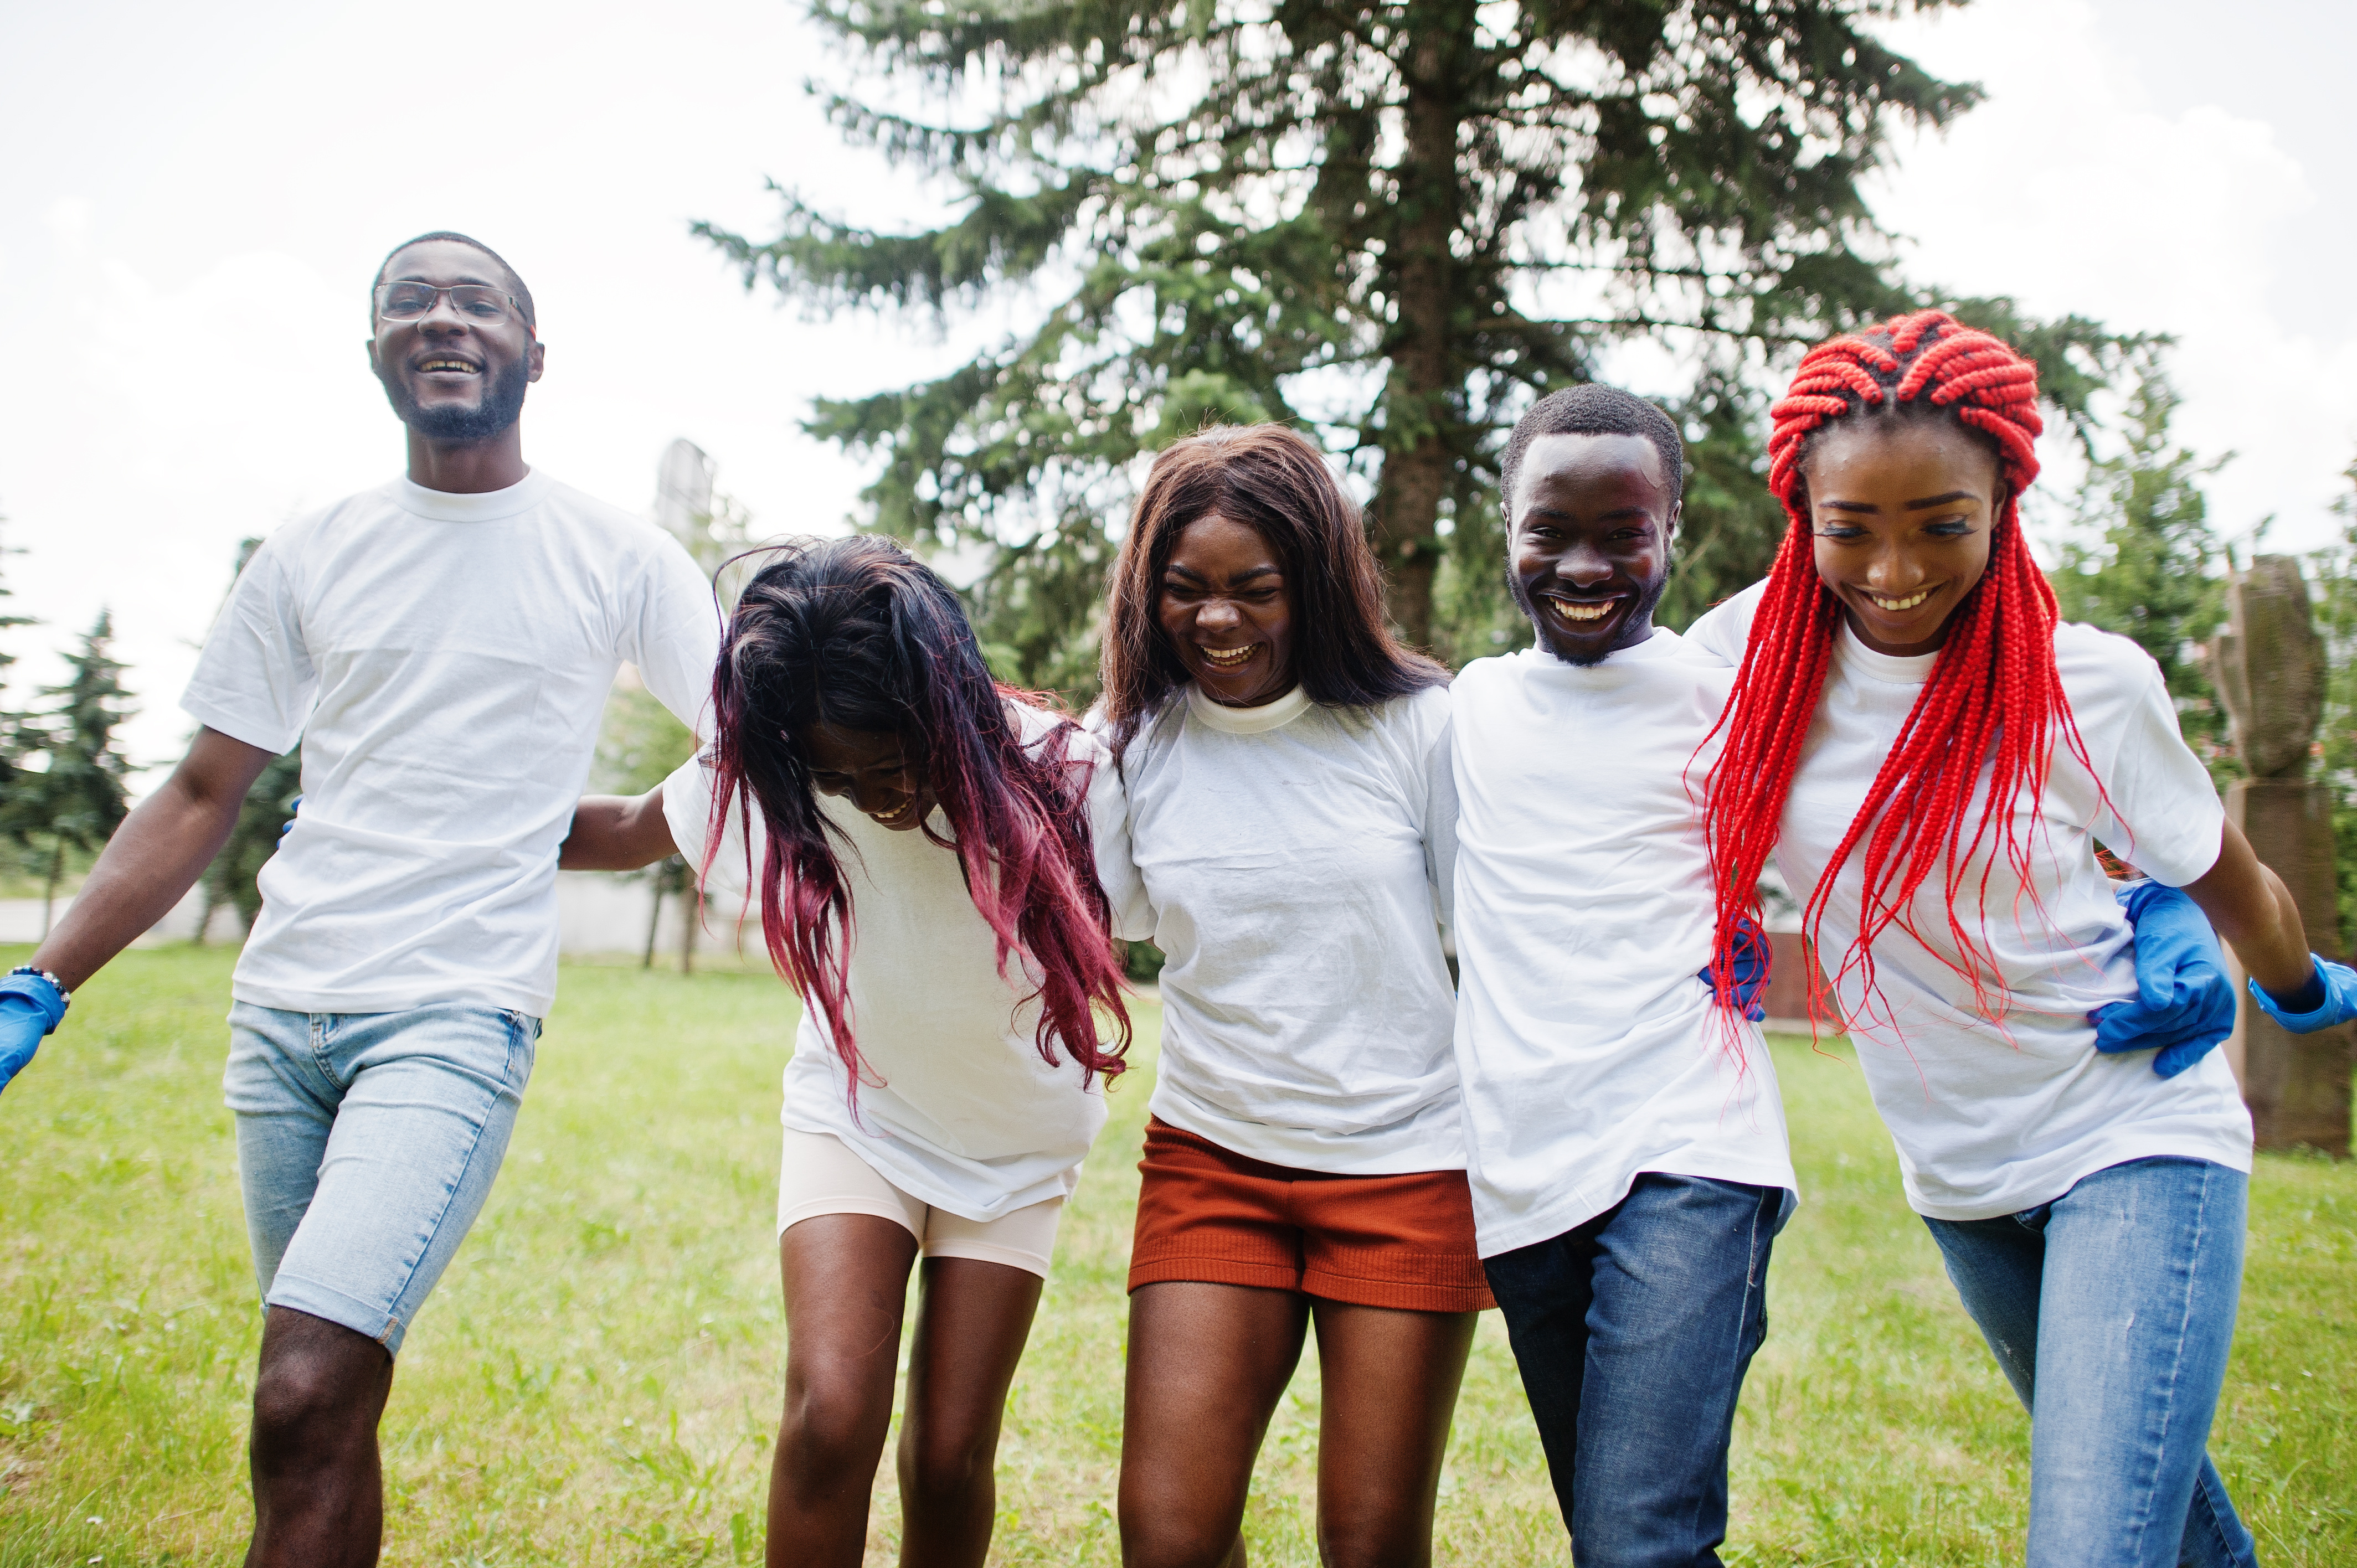 A group of youth walk together and laugh during a service project